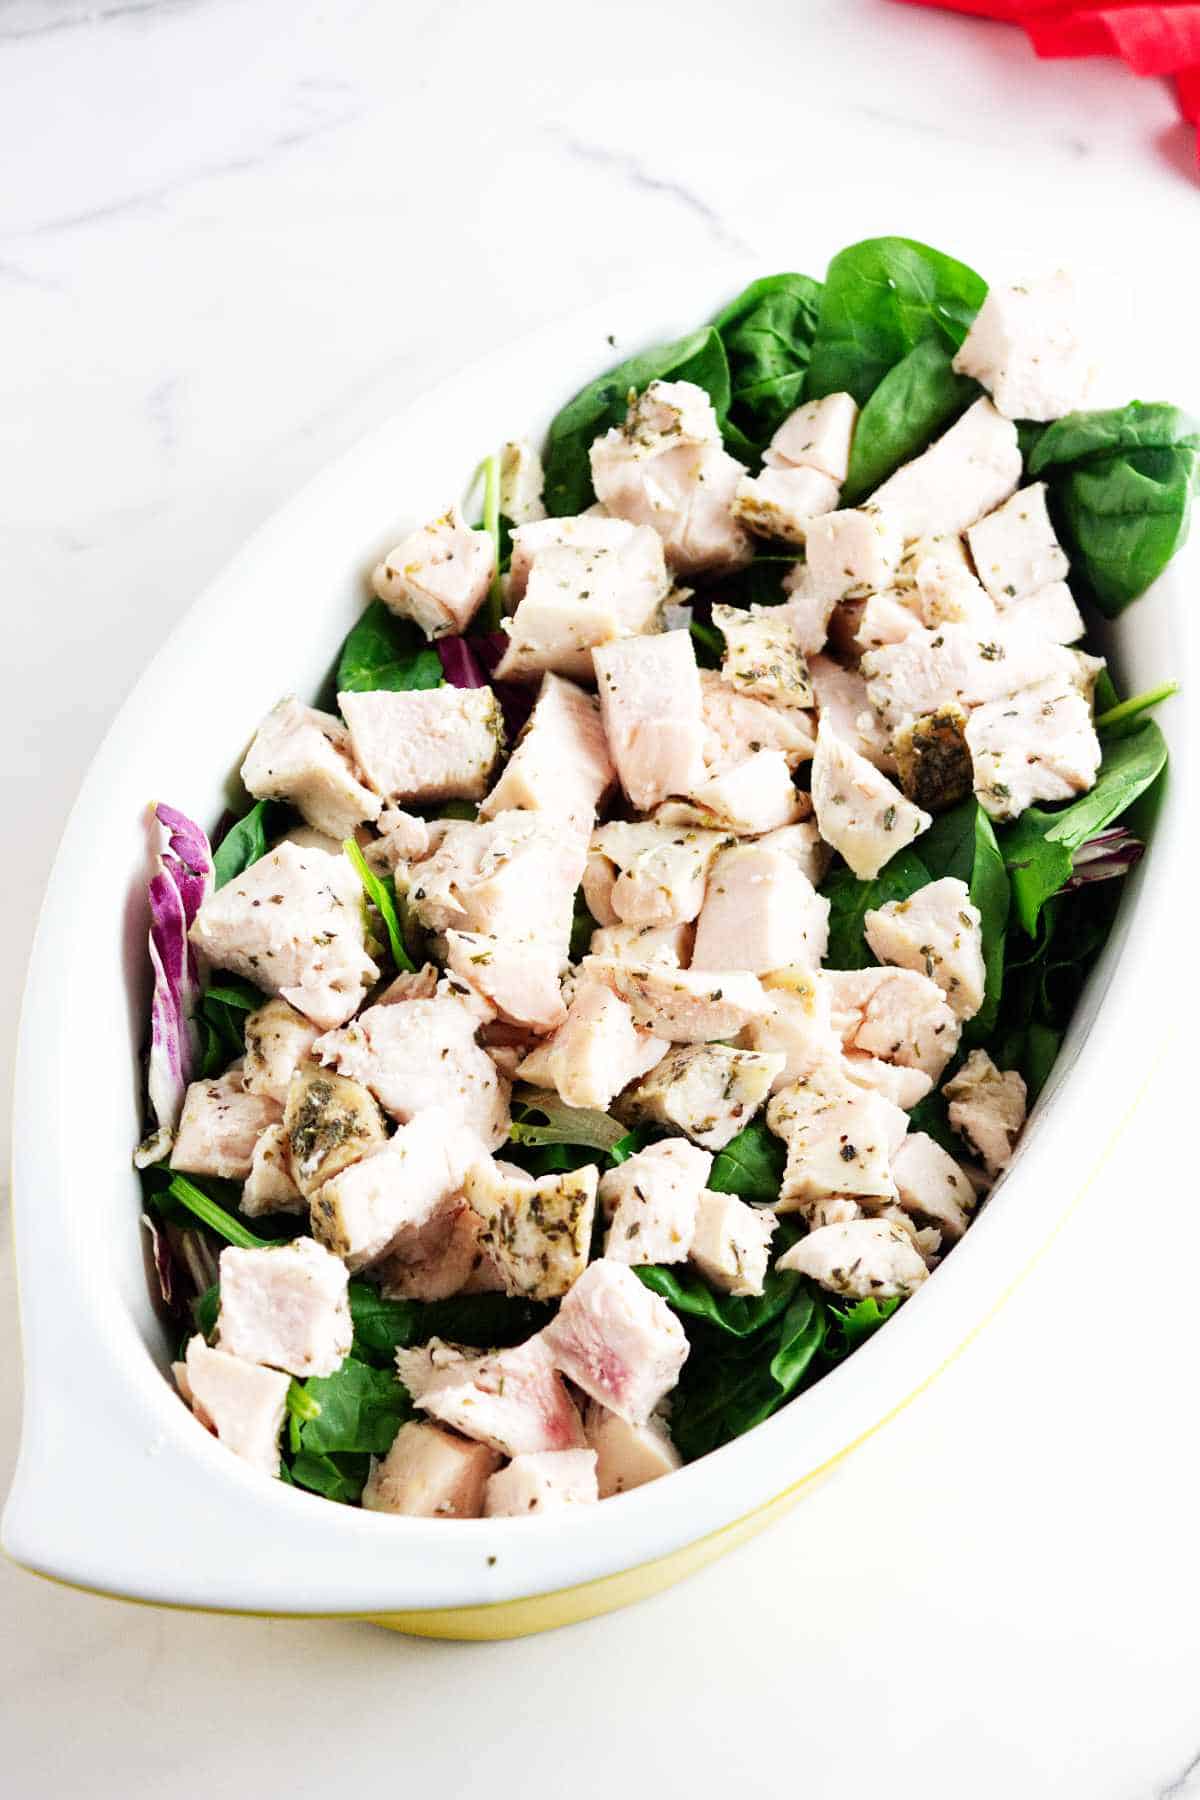 large oval platter filled with salad greens and topped with cooked, cubed chicken breast.